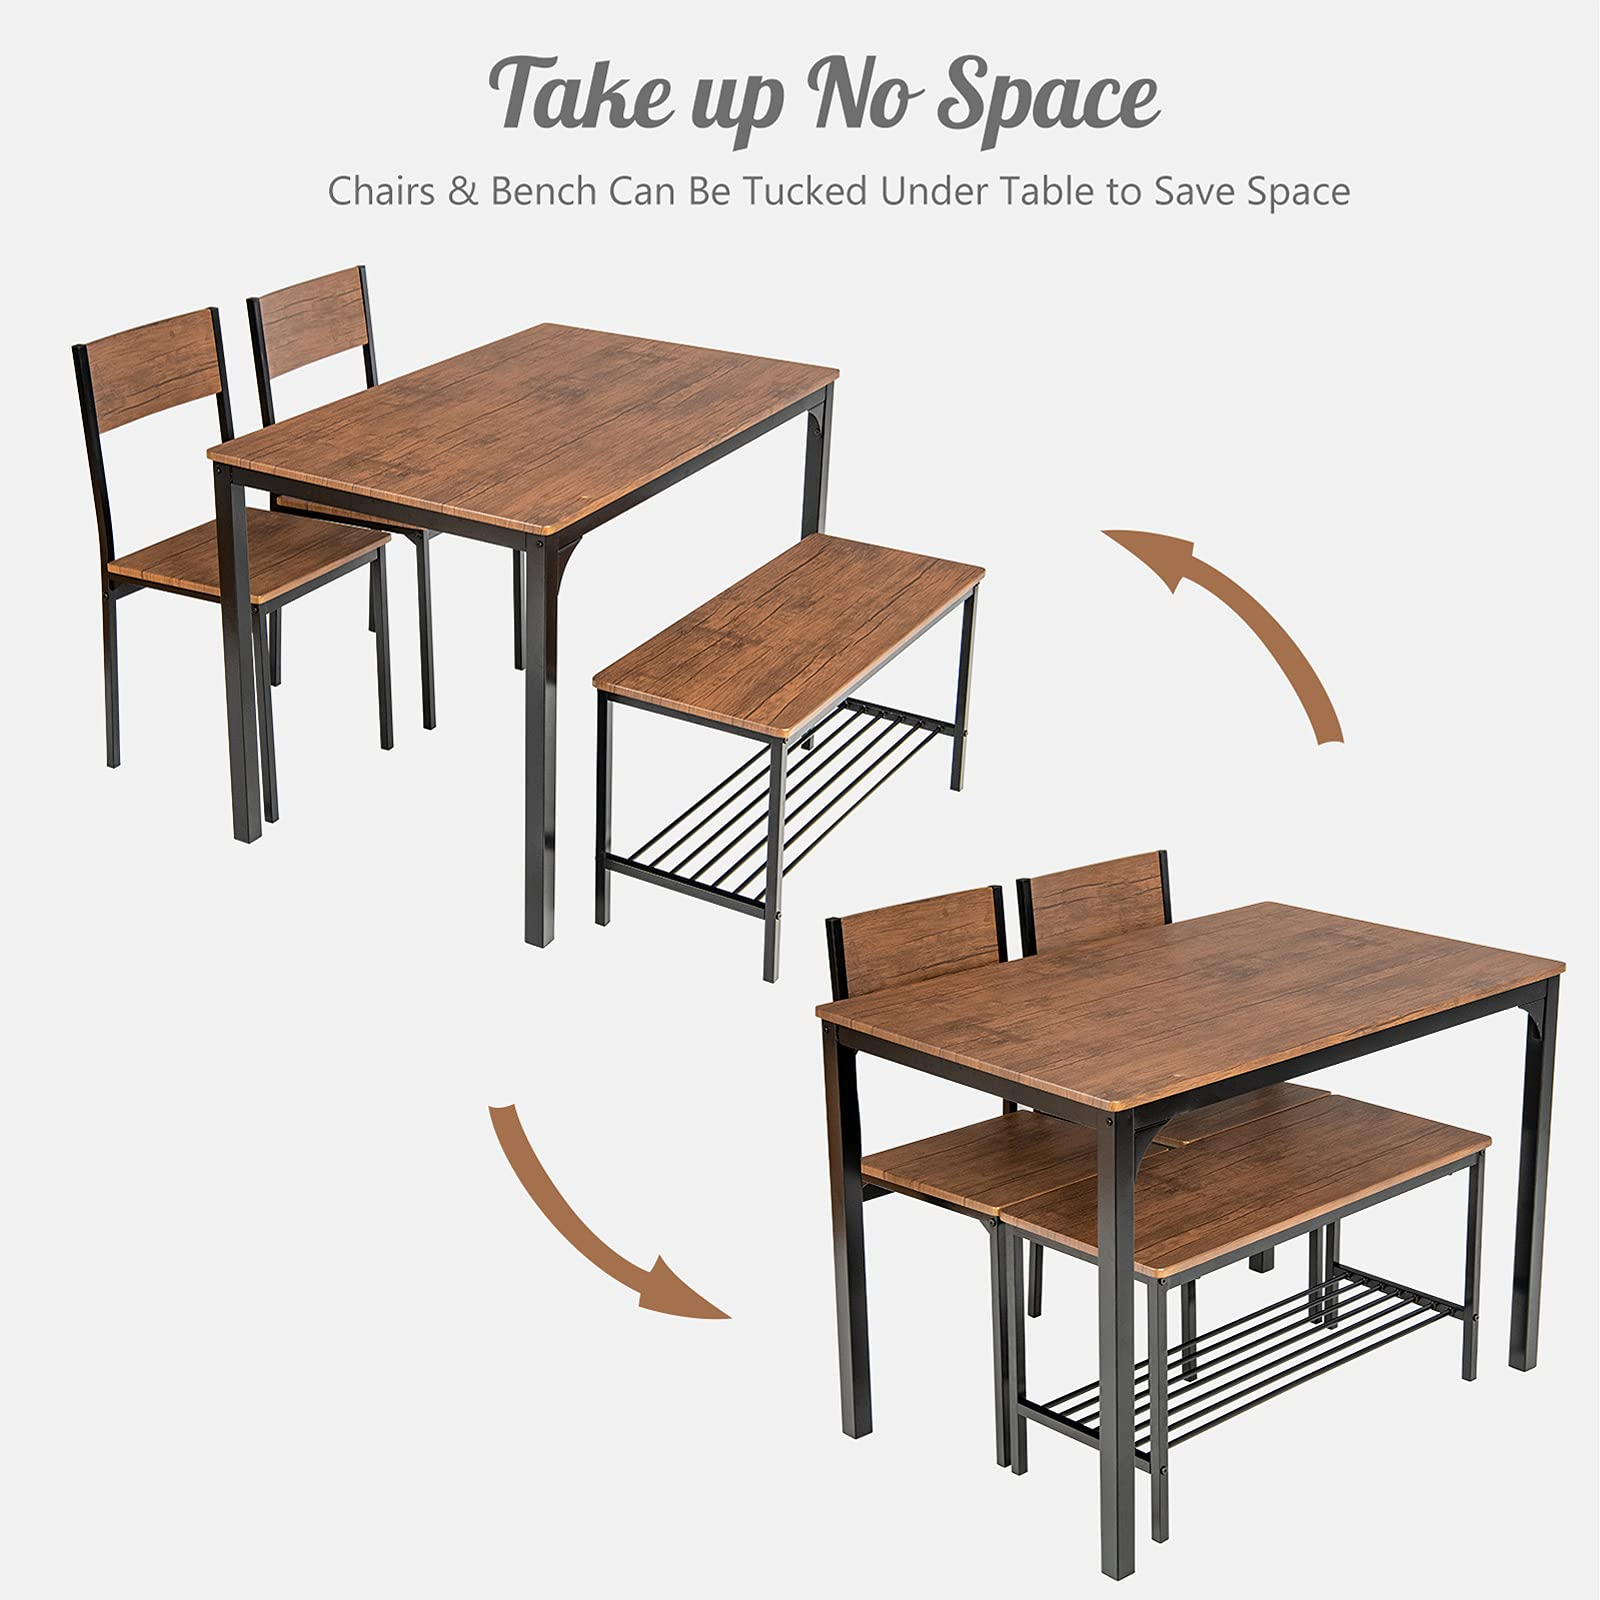 BIM objects - Free download! Giantex Dining Table Set with Bistro Chairs